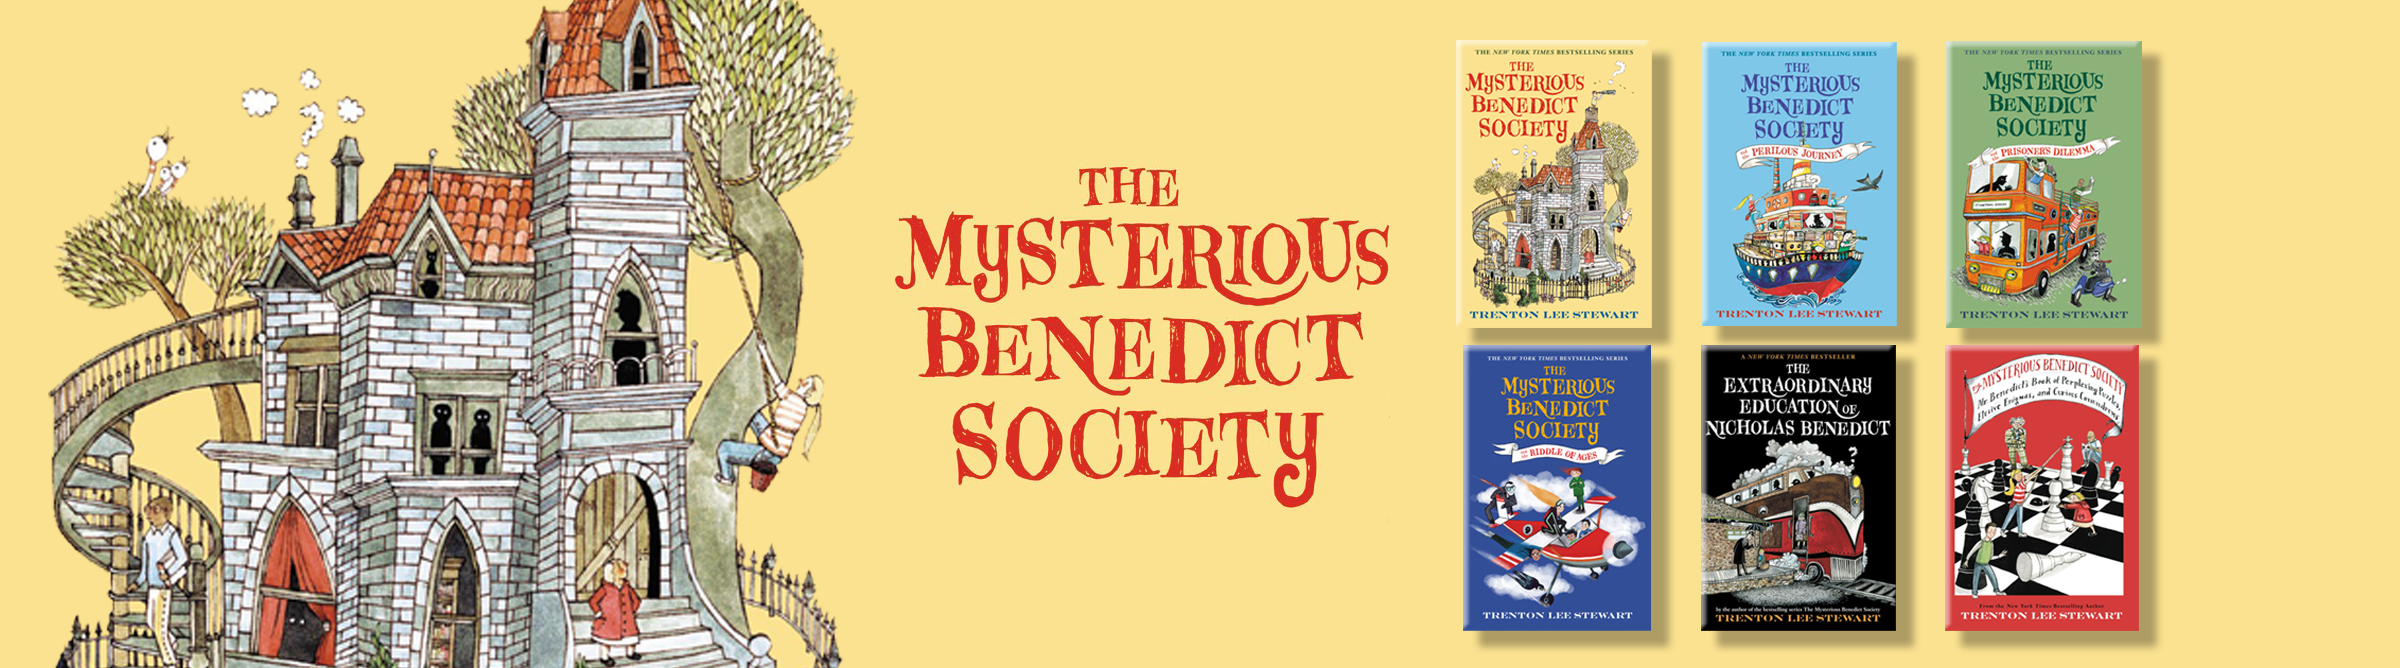 the mysterious benedict society novel